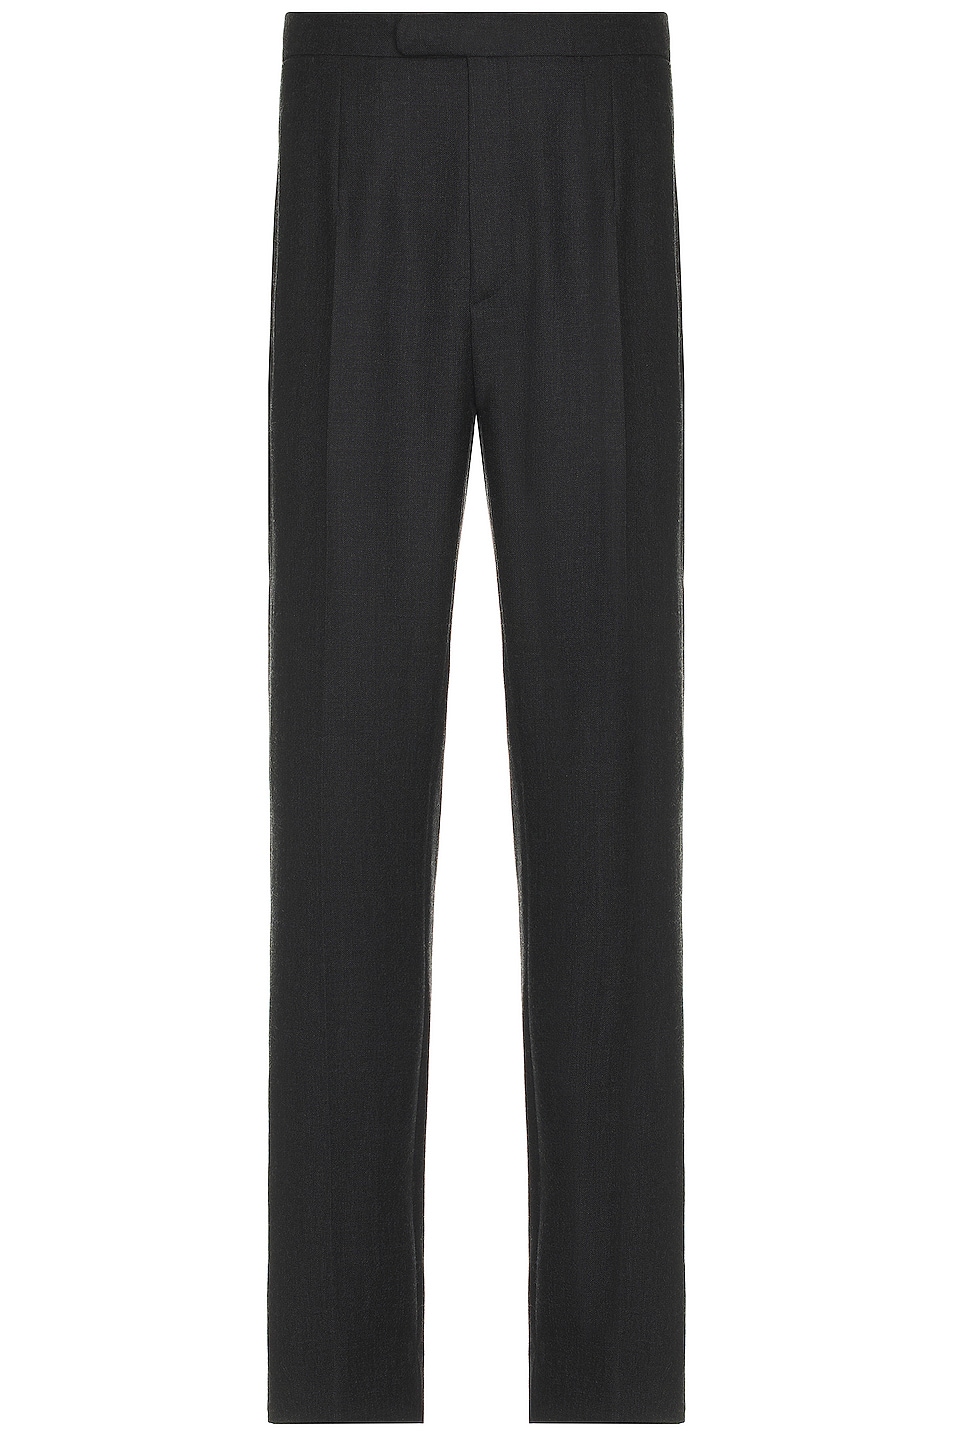 Image 1 of The Row Baird Pant in Anthracite